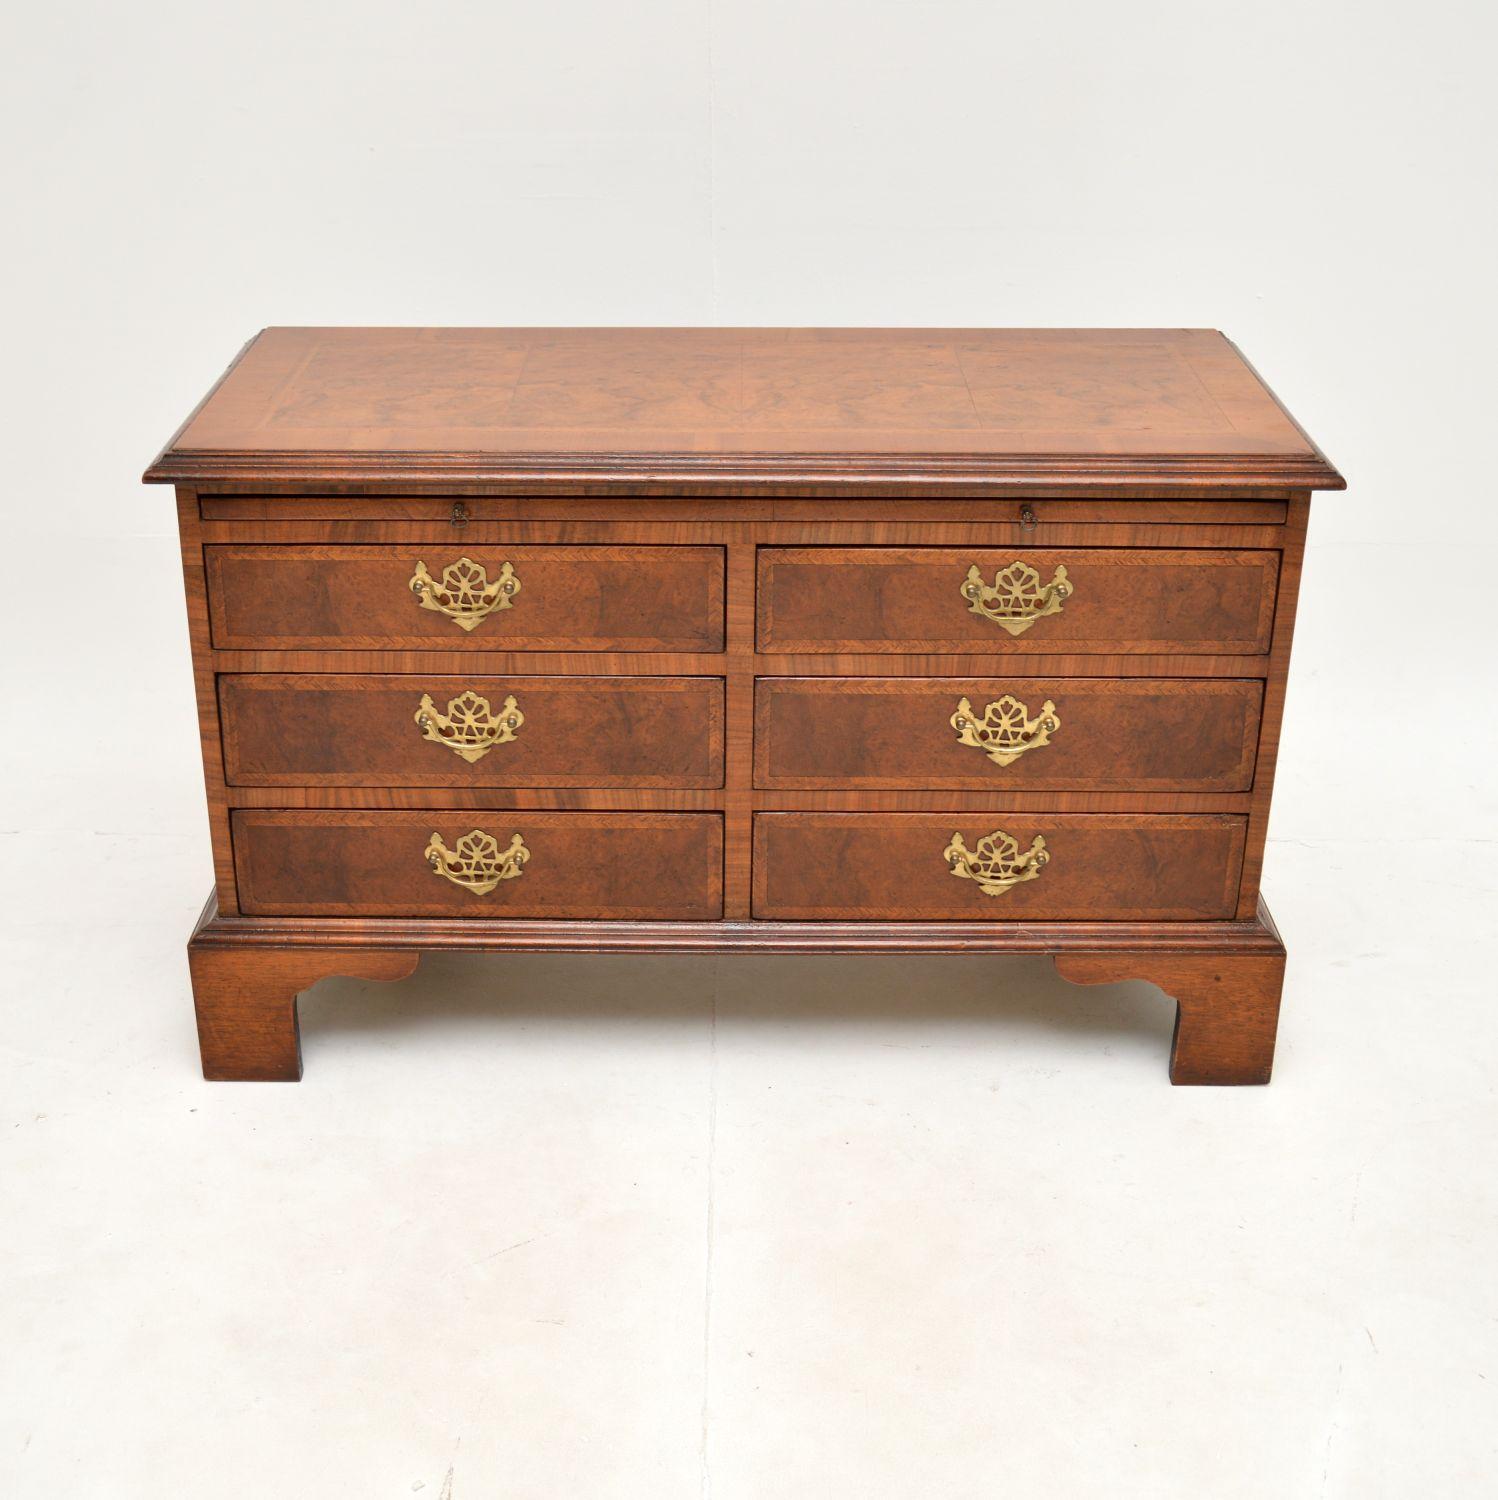 A smart and very well made antique Georgian style burr walnut low boy chest of drawers. This was made in England, it dates from around the 1920-30’s period.

It is a beautifully designed and very useful item, low and compact, with lots of storage